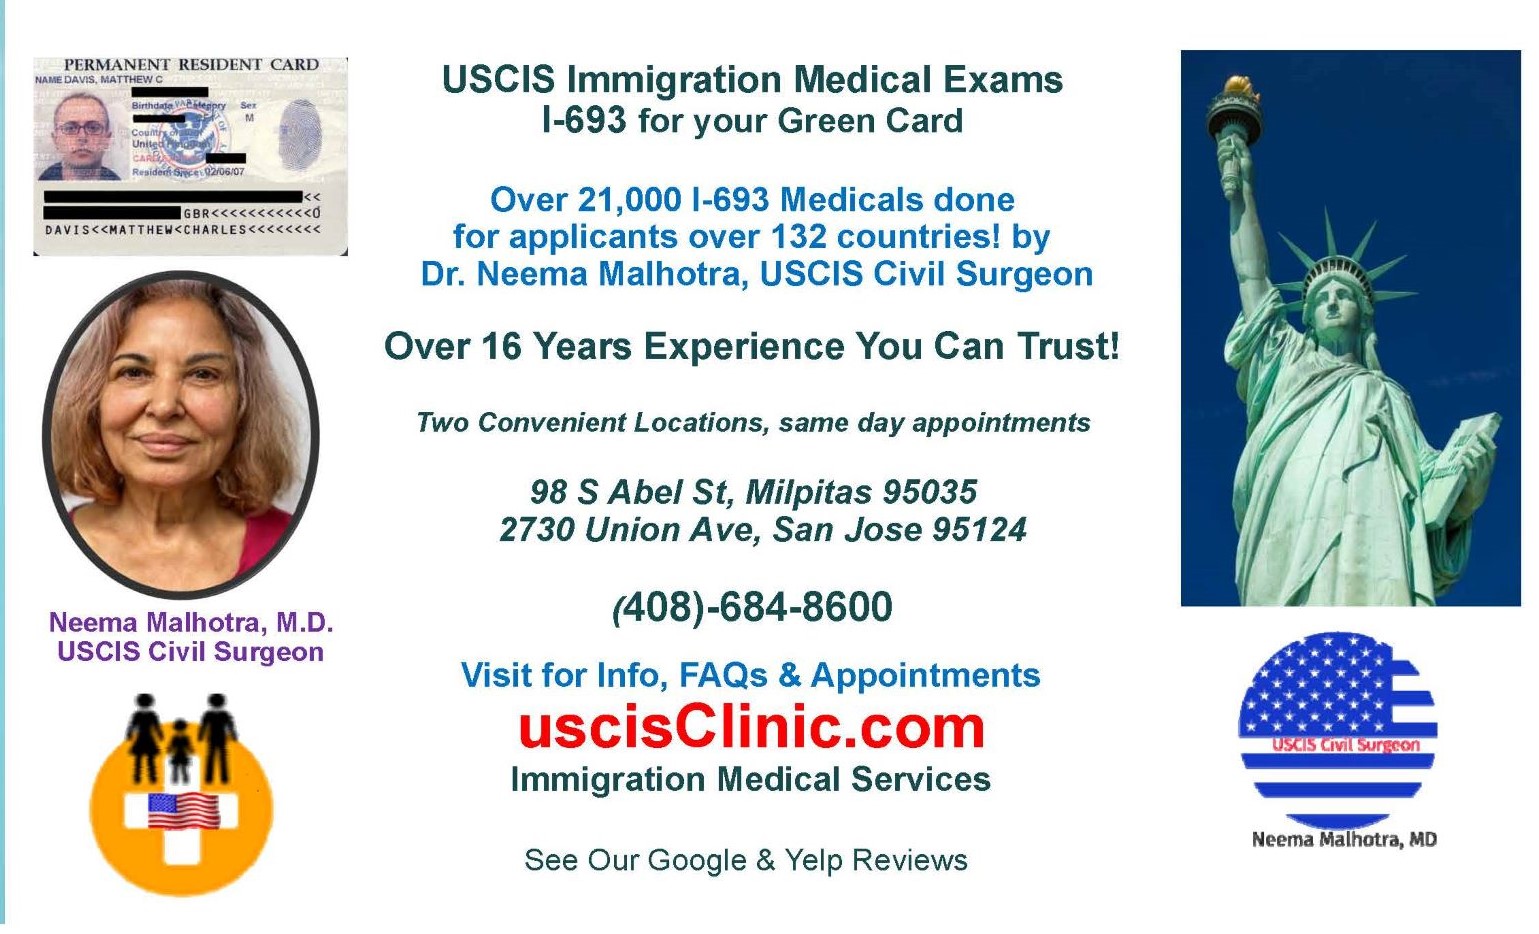 services by Neema Malhotra M.D... USCIS Clinic, Milpitas, San Jose Silicon Valley Bay Area , immigration medical exam i-693 uscisclinic.com 408-684-8600